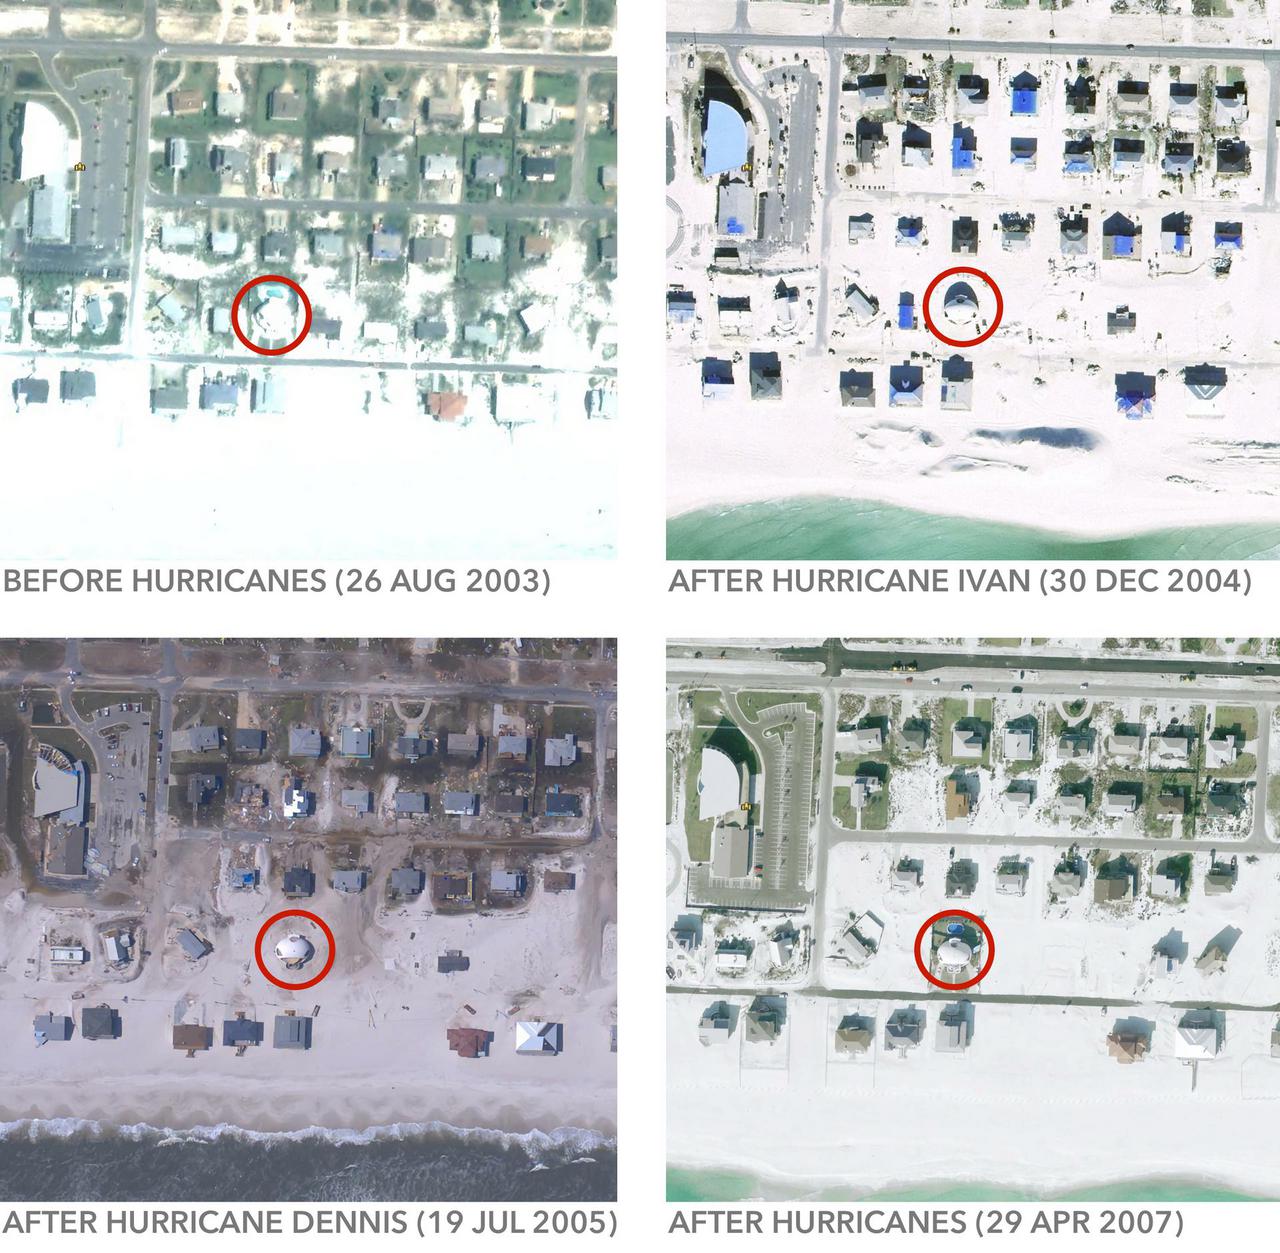 Satellite images of hurricane damage around Dome of a Home